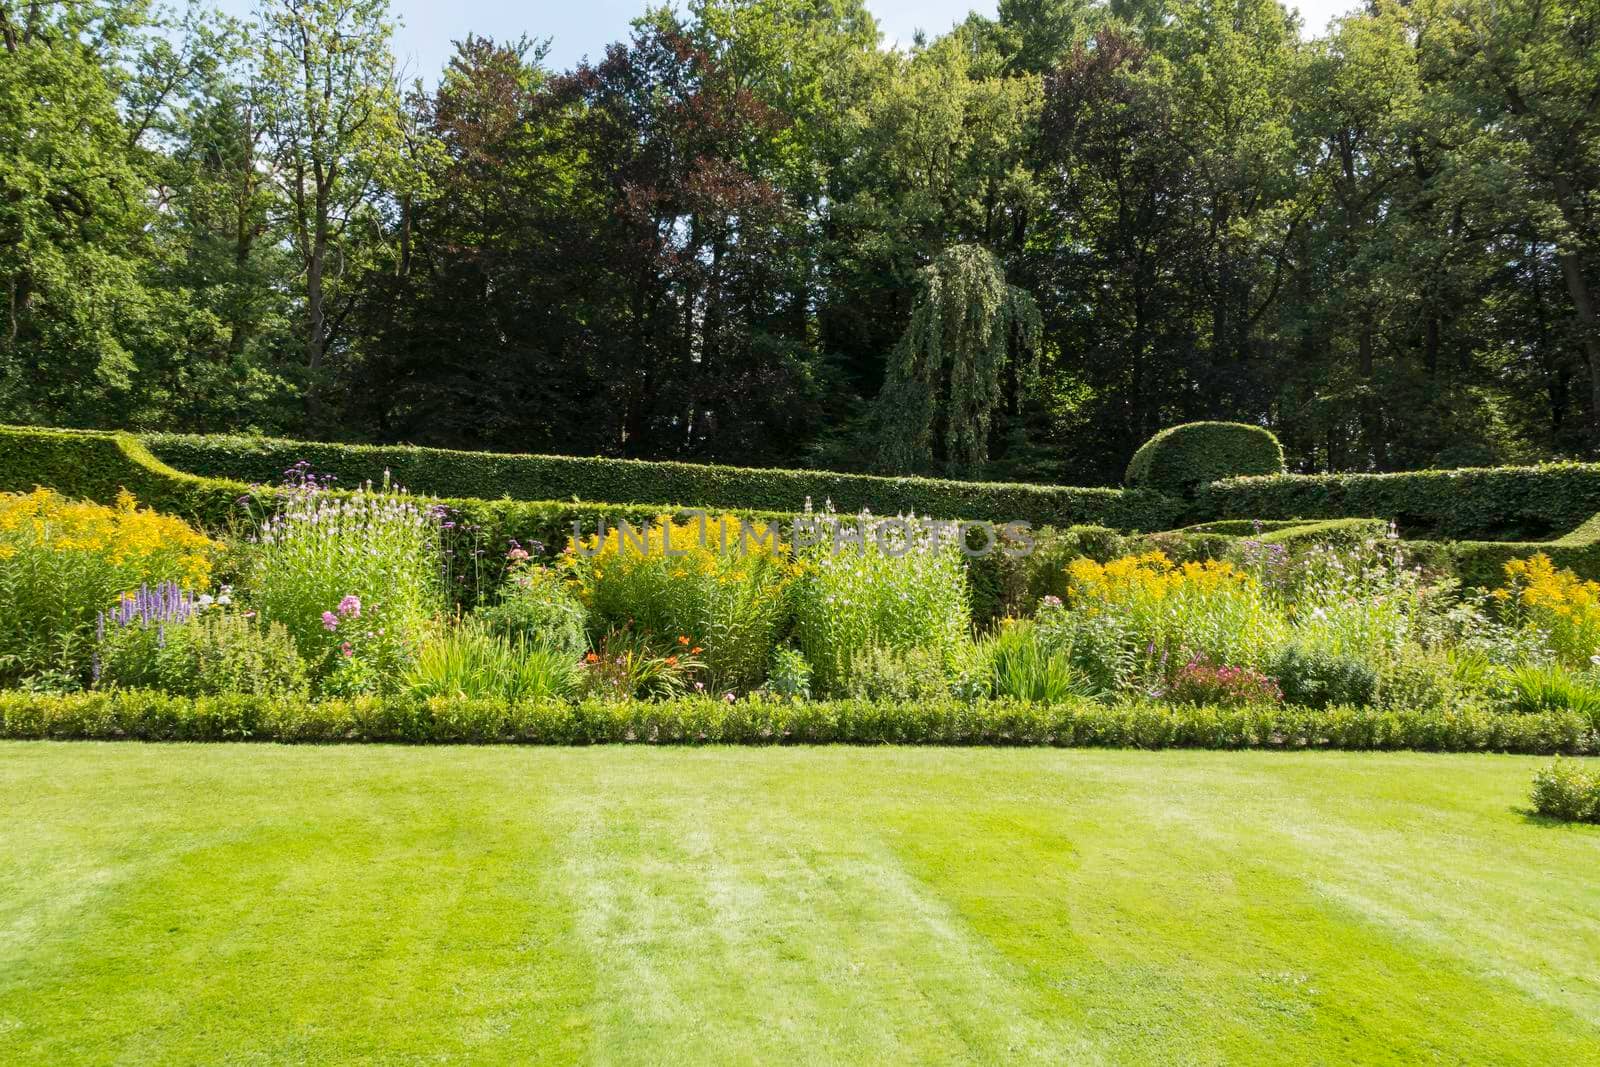 english green garden with borders full of flowers in purple yellow and white